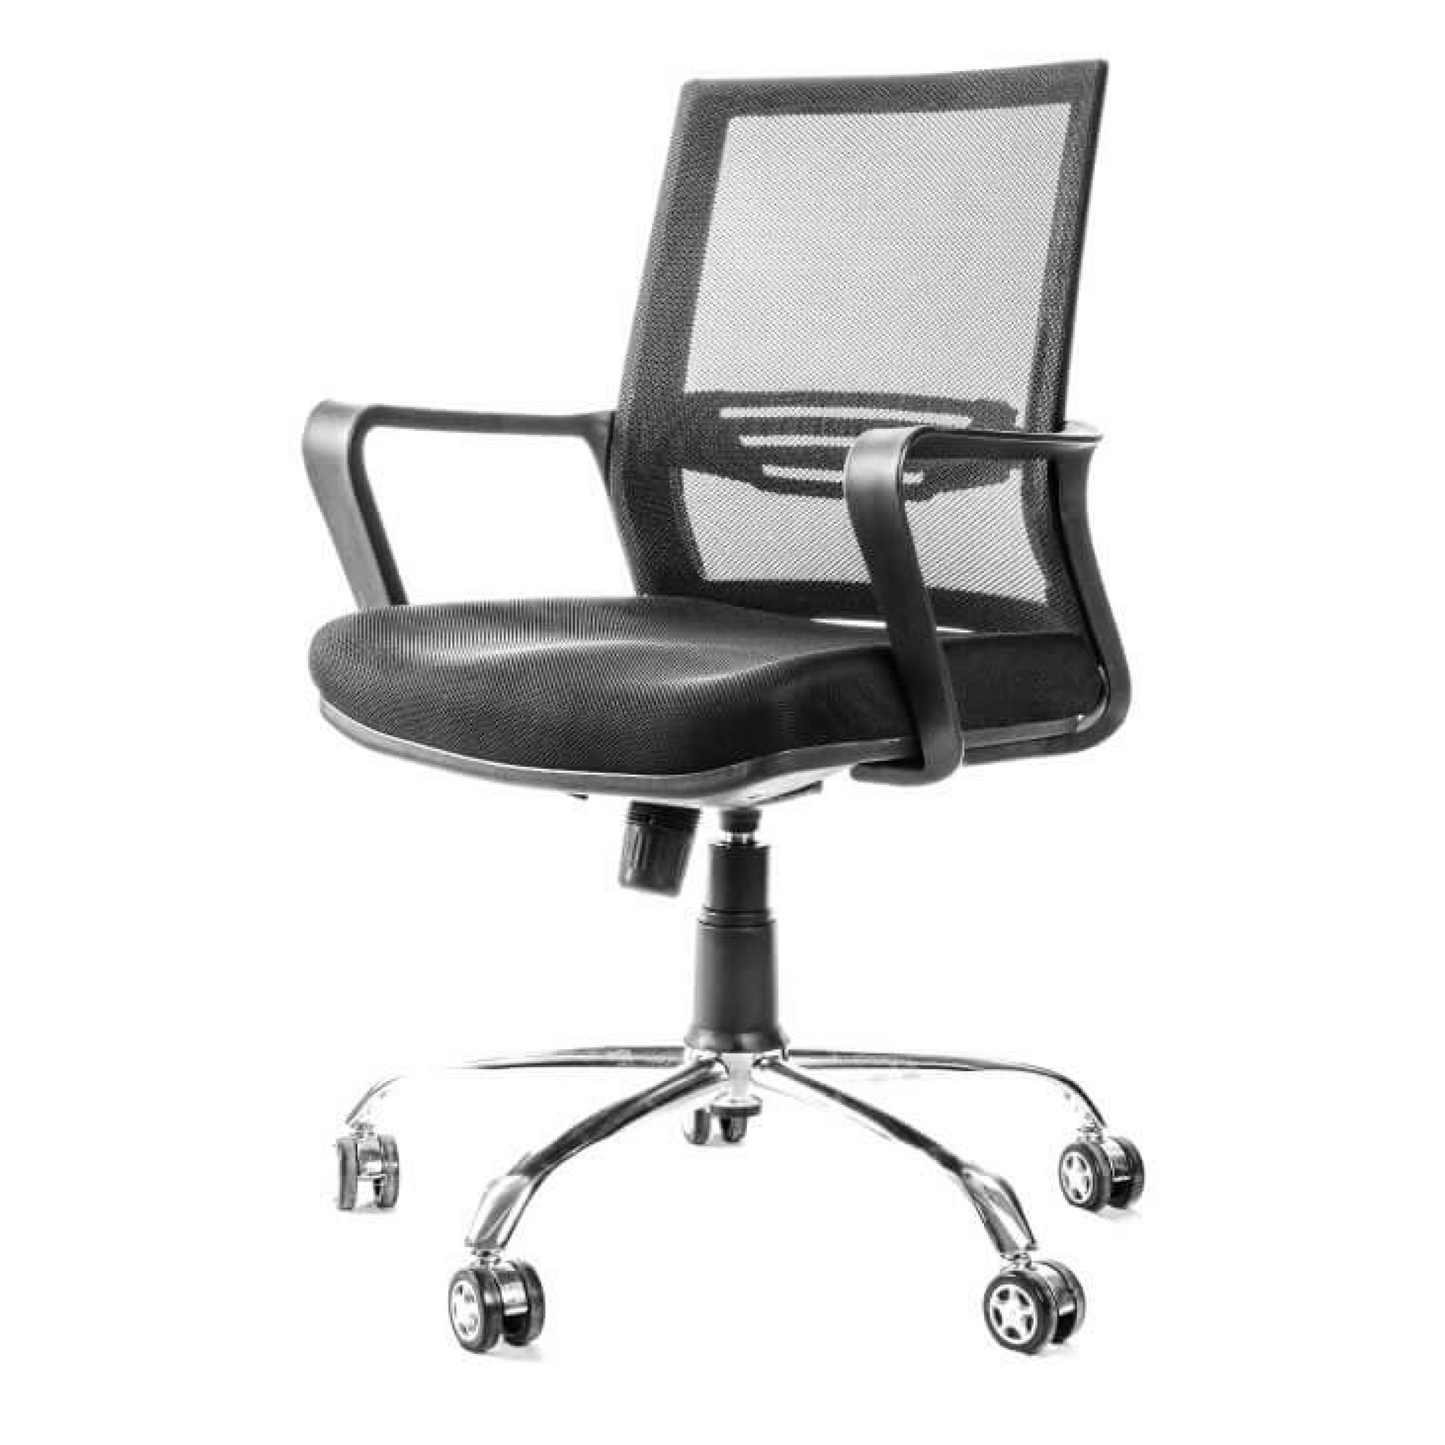 Best Office Chair - Model No. KP-DAMSLEY MB DX